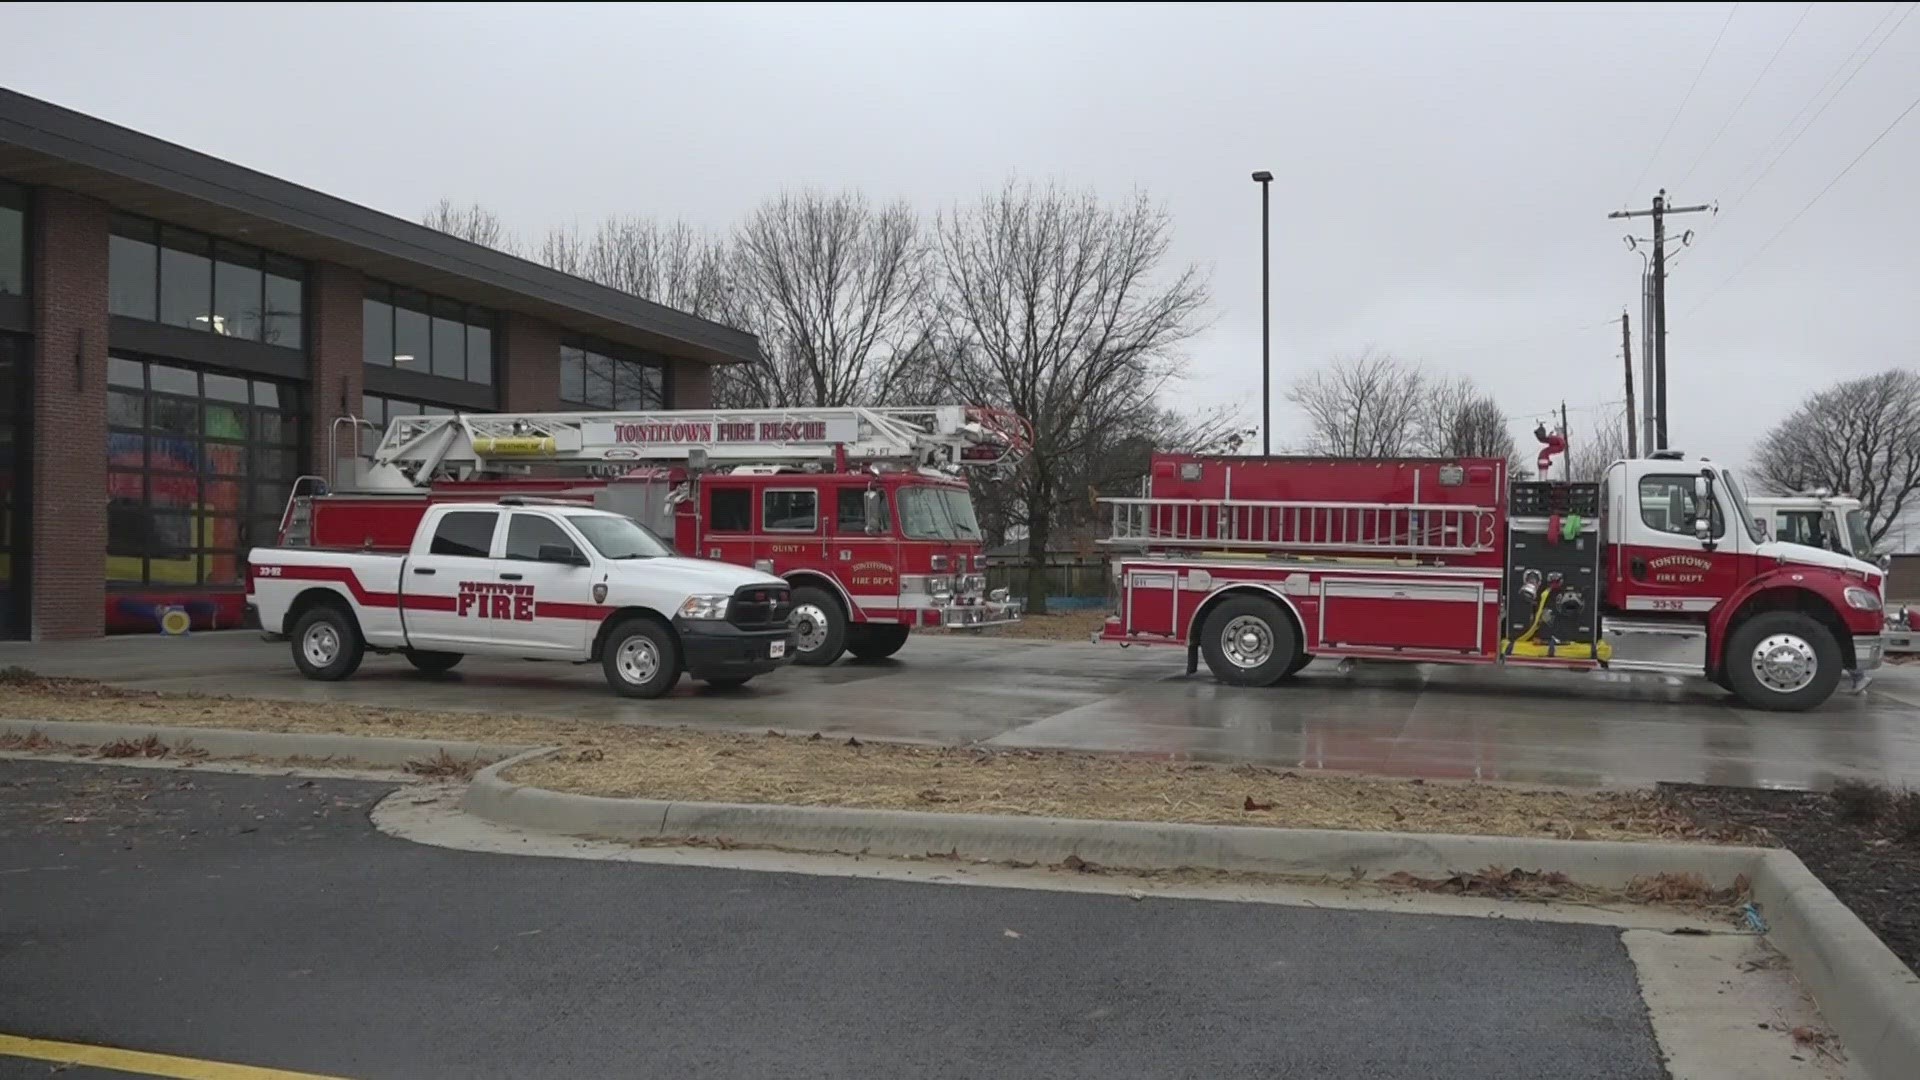 IT'S BEEN OVER A YEAR SINCE THE TONTITOWN FIRE DEPARTMENT BROKE GROUND ON ITS BRAND-NEW FIRE STATION.